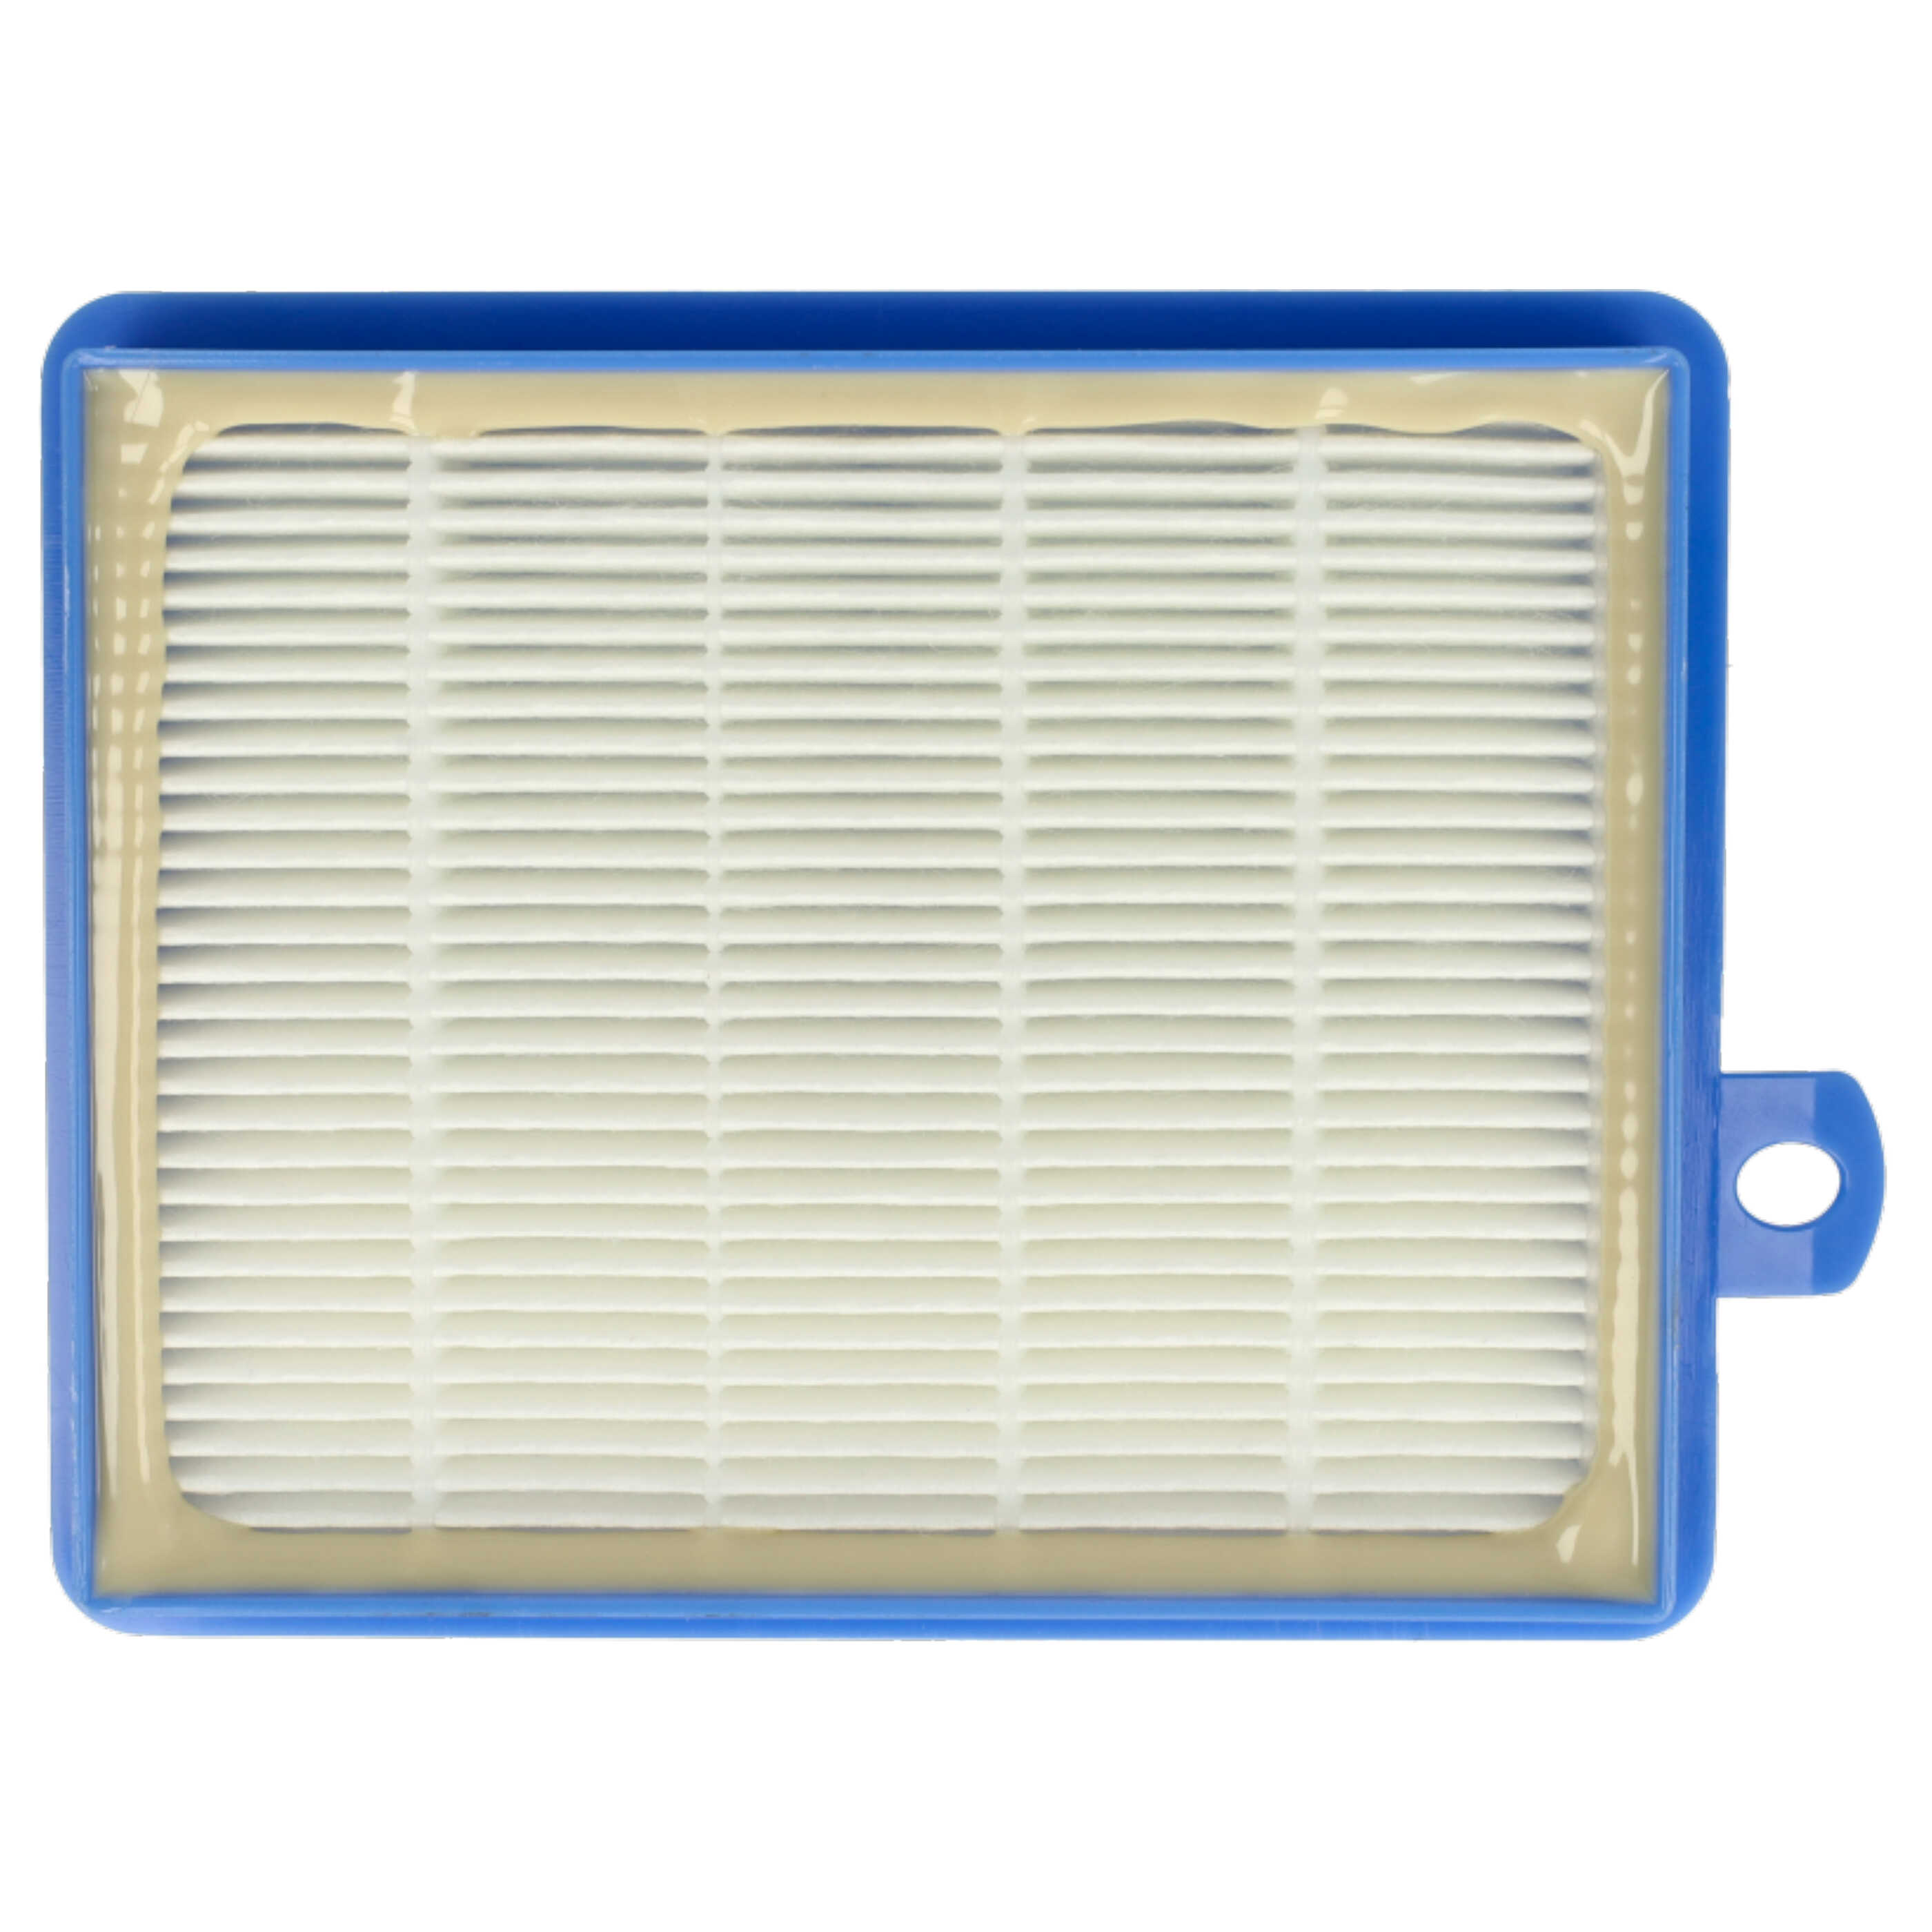 3x HEPA filter replaces AEF13W, H13, AEF 13 W for PhilipsVacuum Cleaner